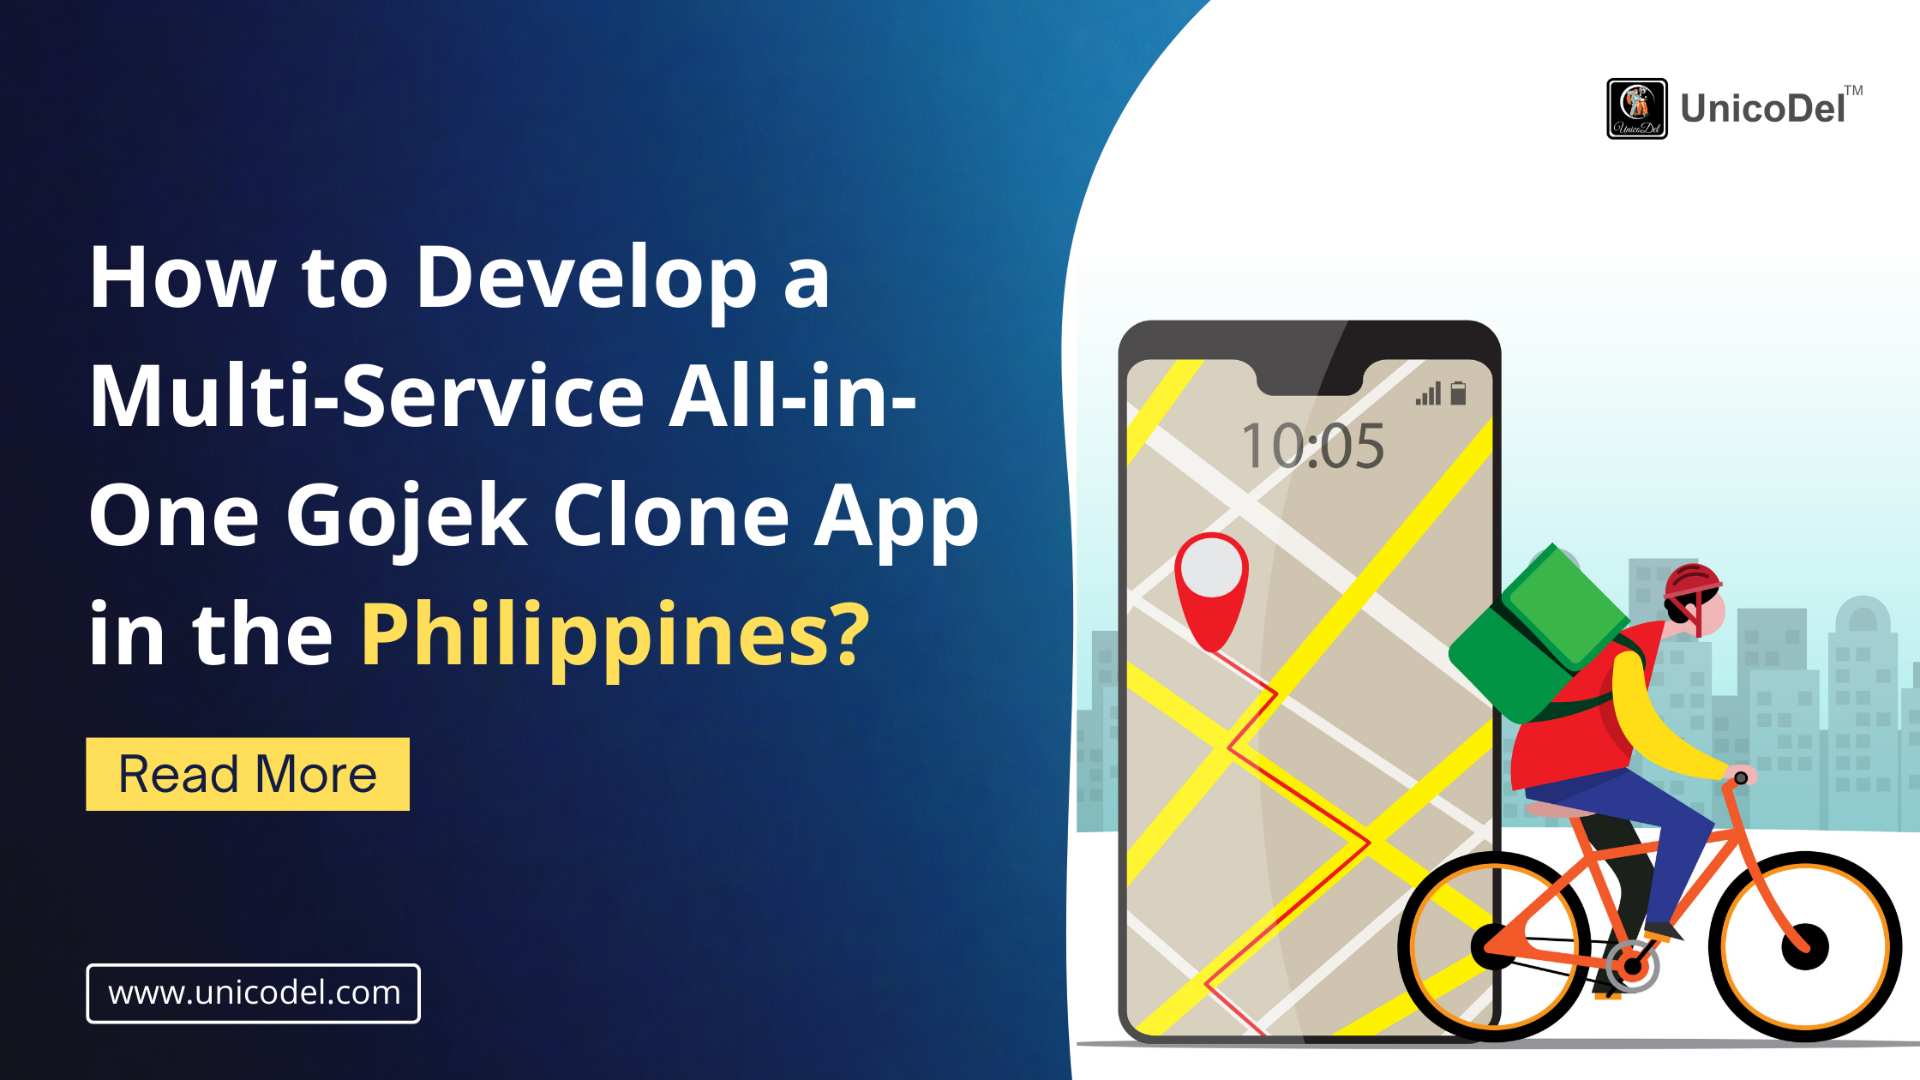 How to Develop a Multi-Service All-in-One Gojek Clone App in the Philippines?